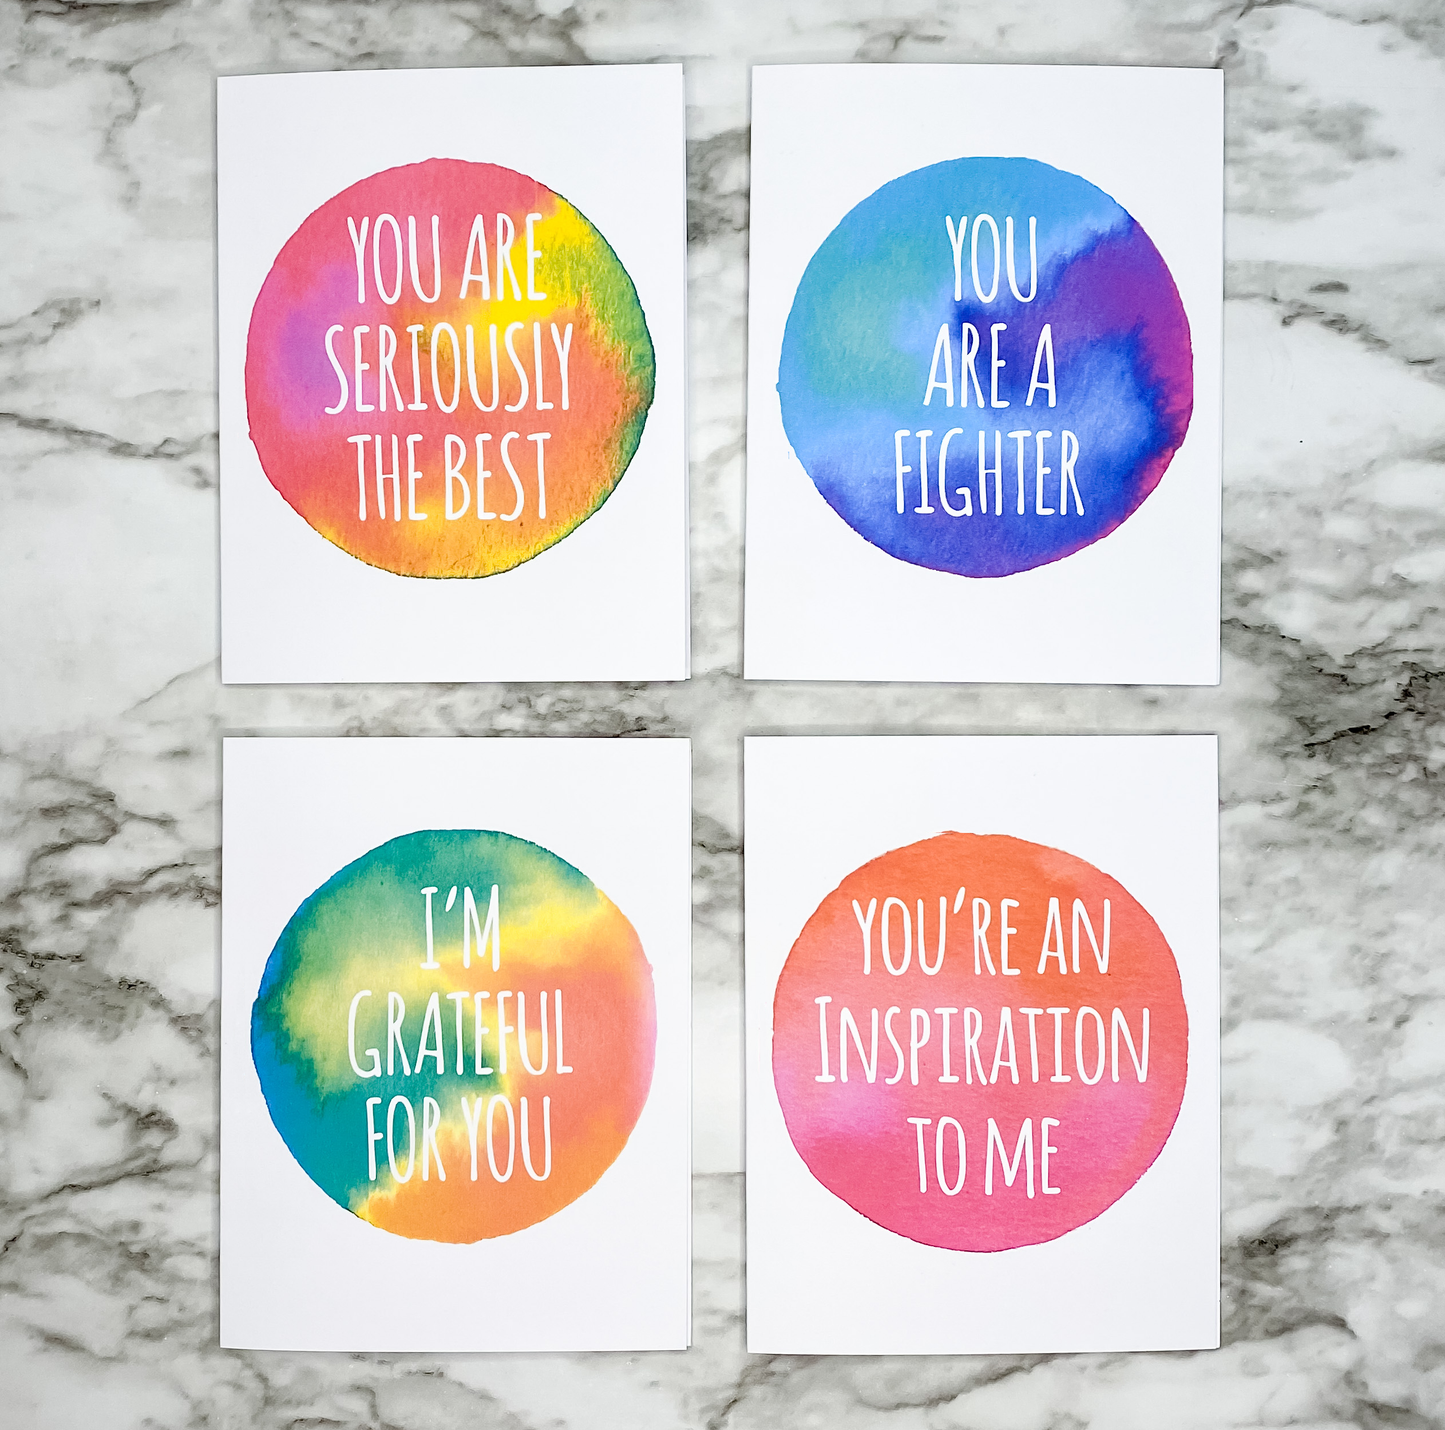 Words of Affirmation Postcard and Note Card Sets